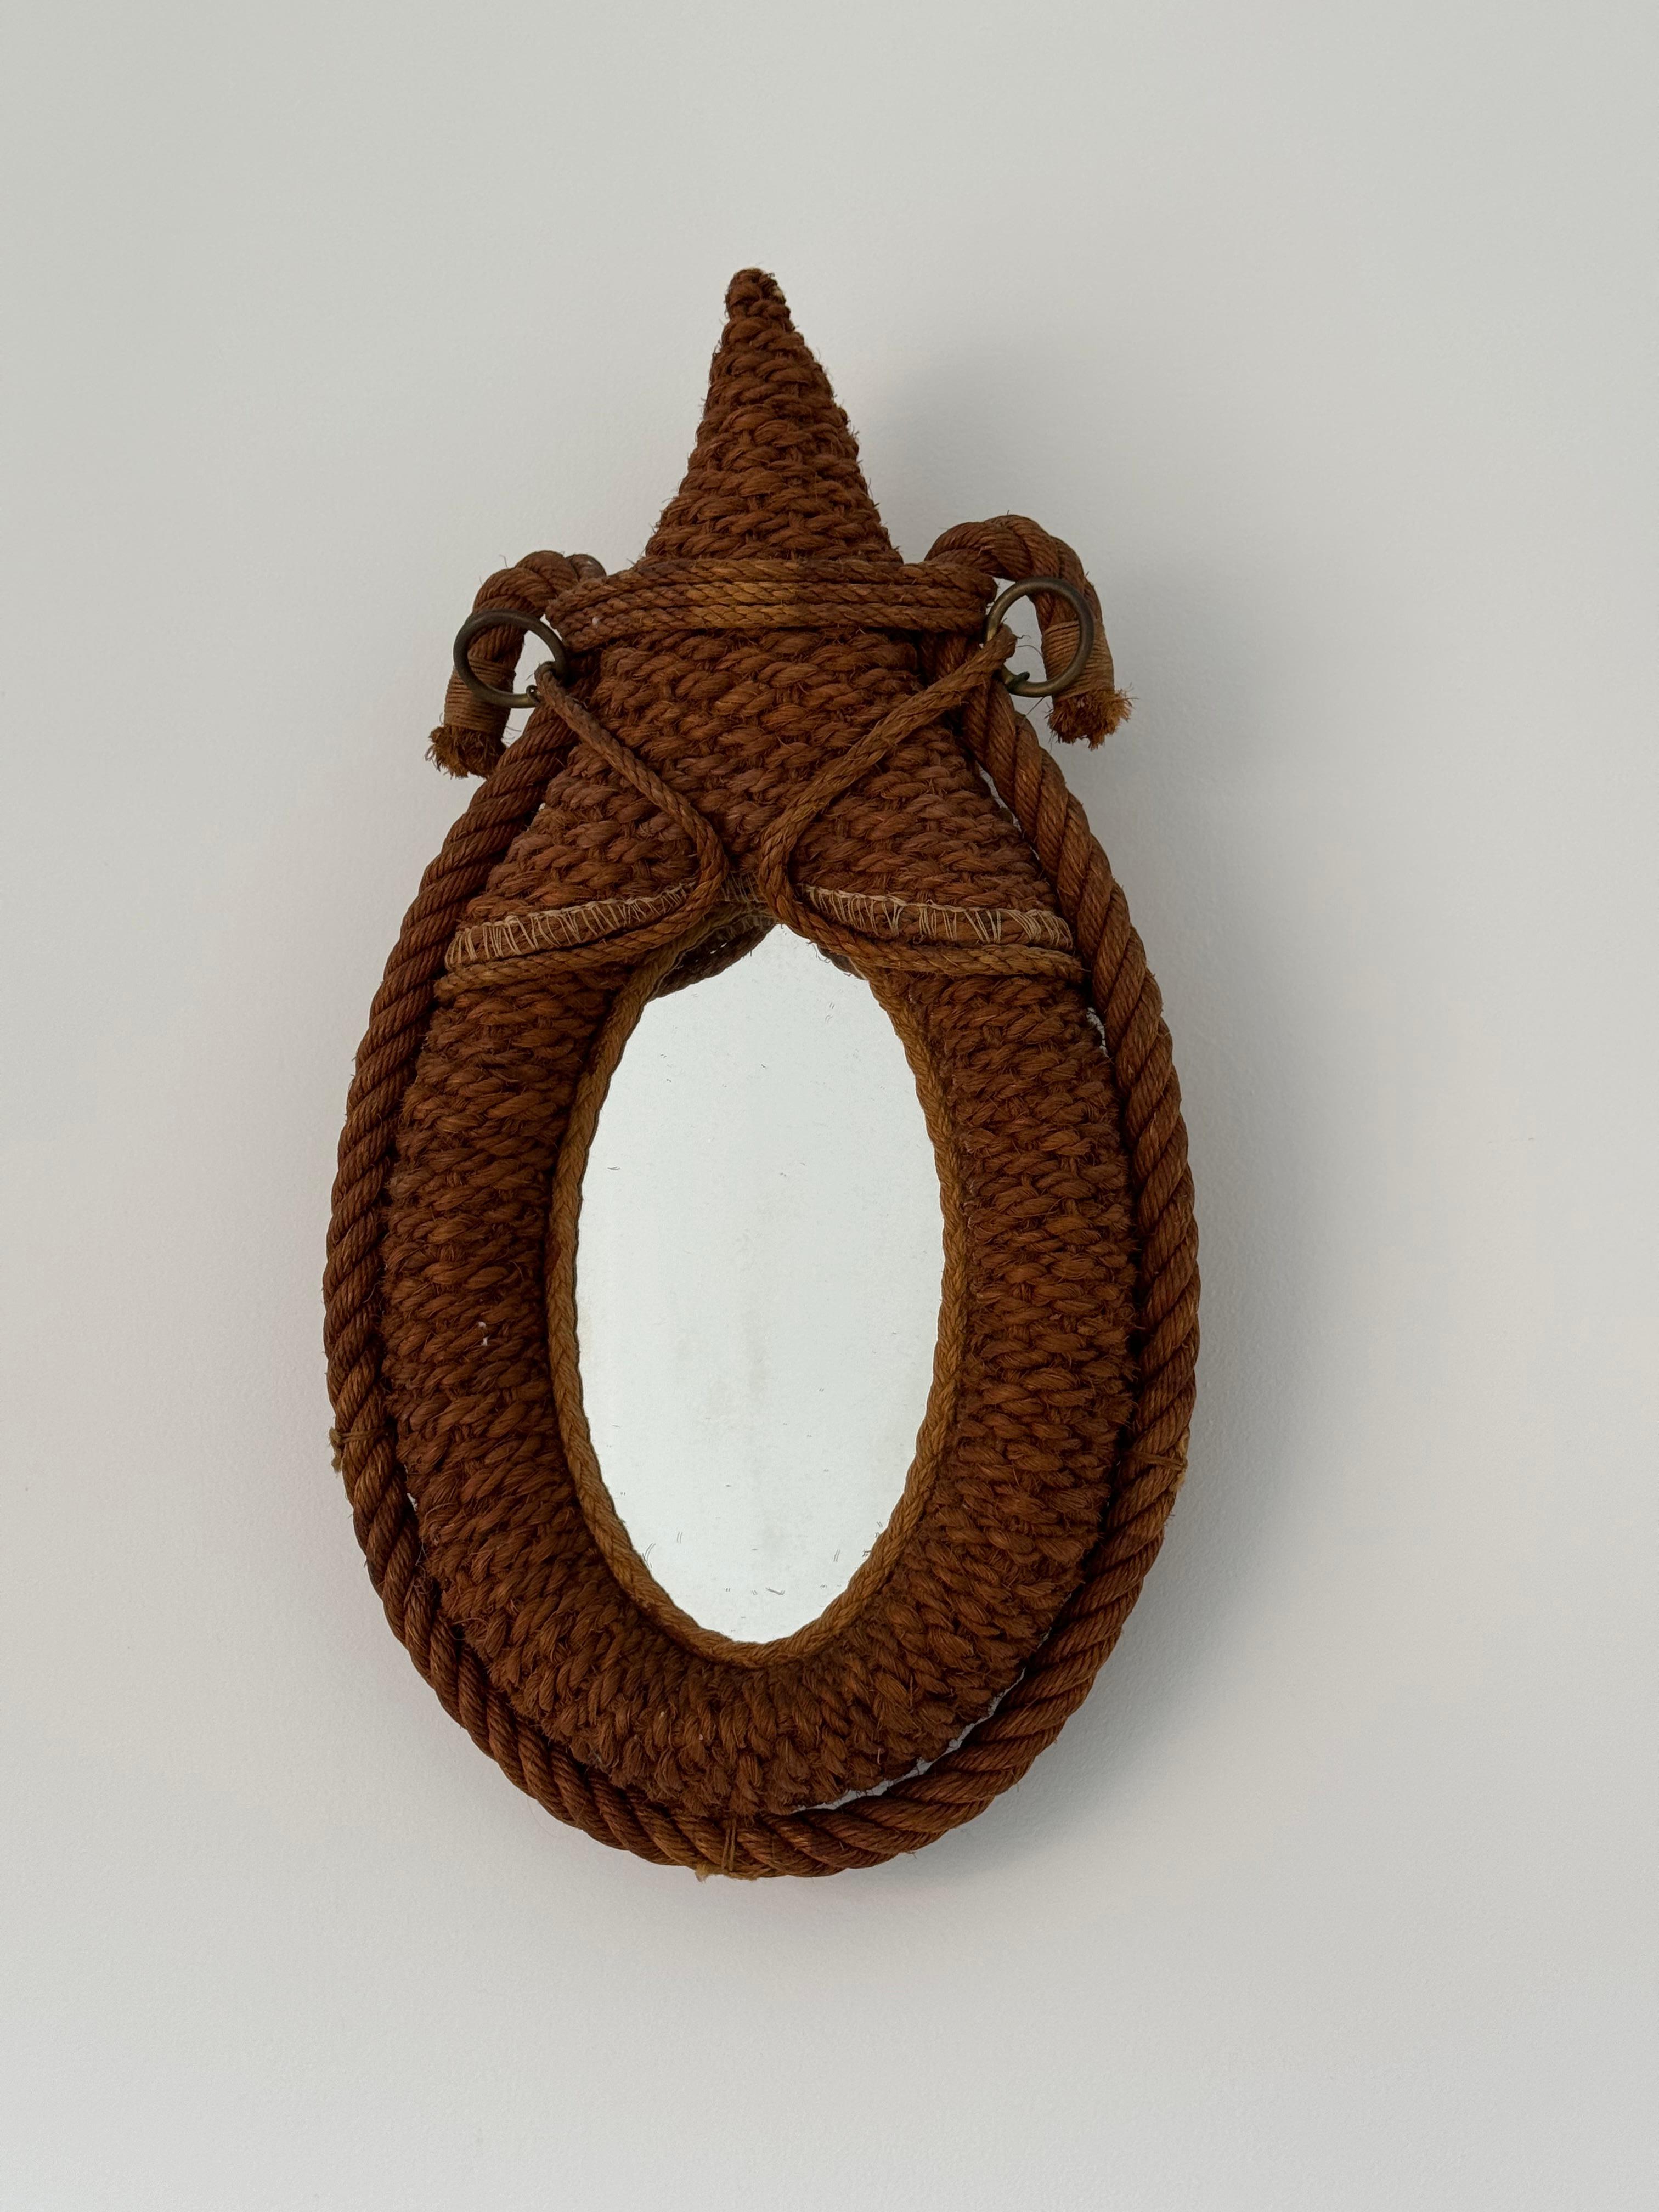 Design rope wall mirror attributed to Adrien Audoux & Frida Minet.

Mirror shaped like a horse collar.

Original oval shaped mirror has light fogging  Mirror frame comprised of signature braided rope.

Good condition.

france 1950s